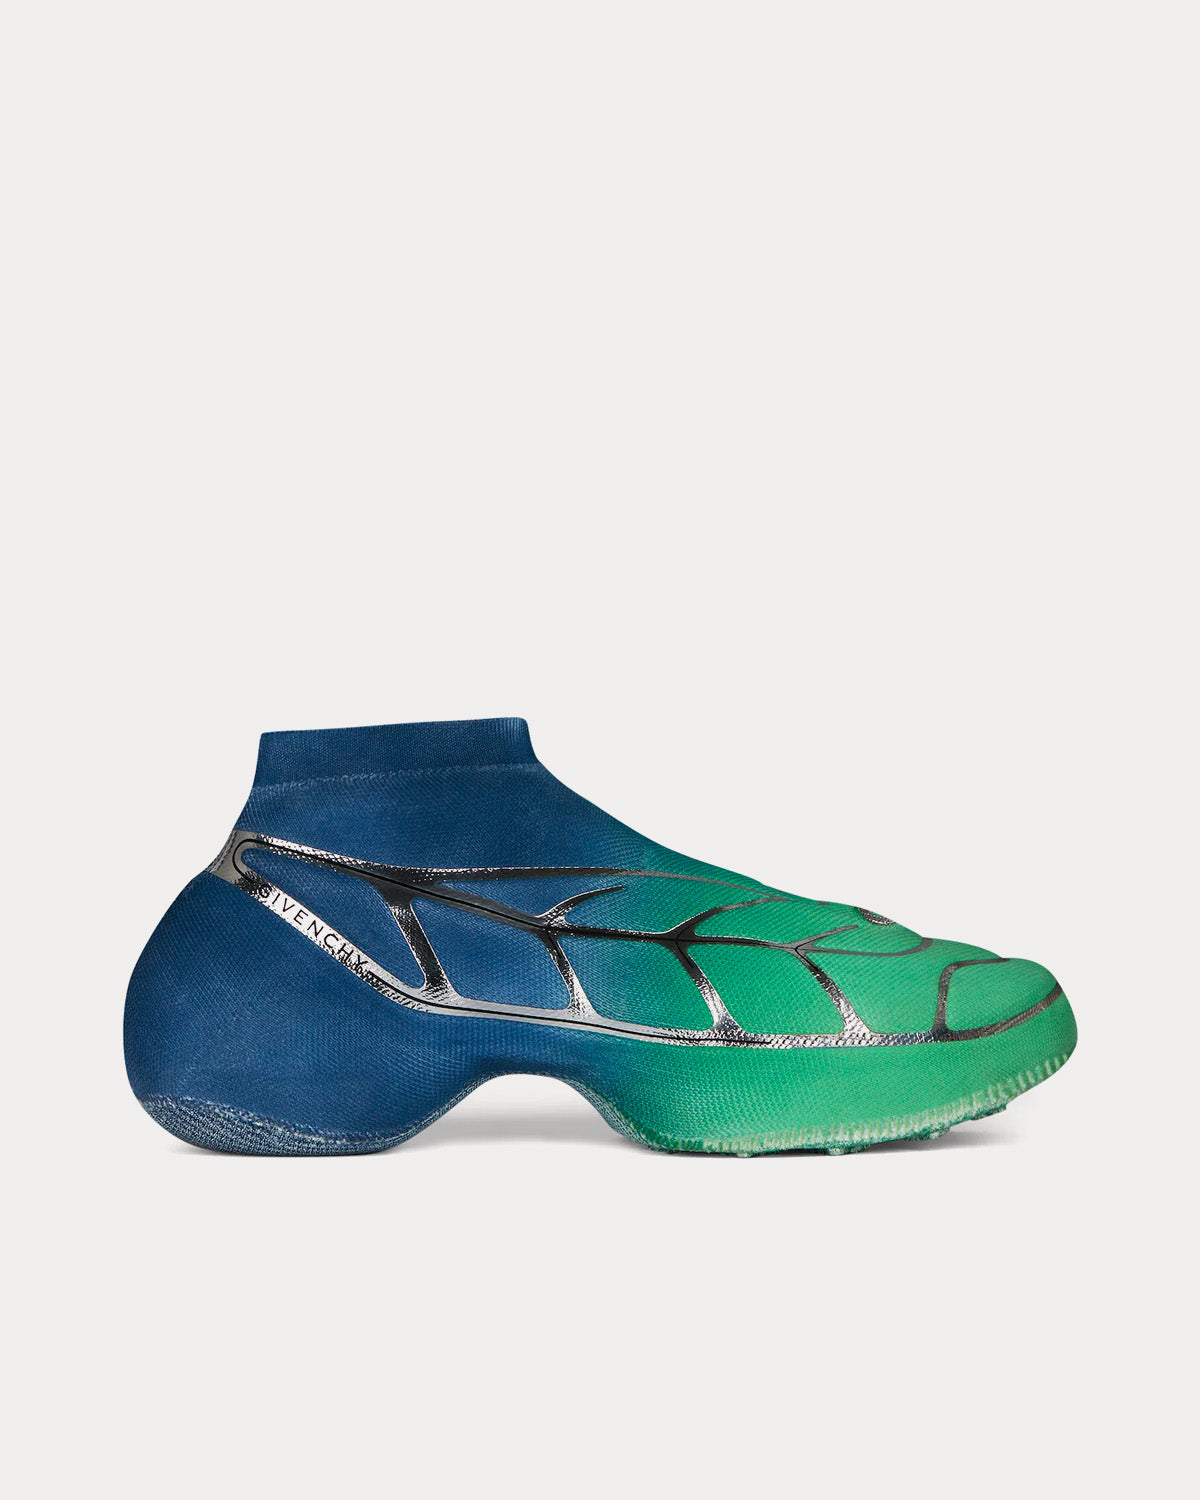 Givenchy x BSTROY - TK-360+ Mid Mesh Blue / Green Slip On Sneakers